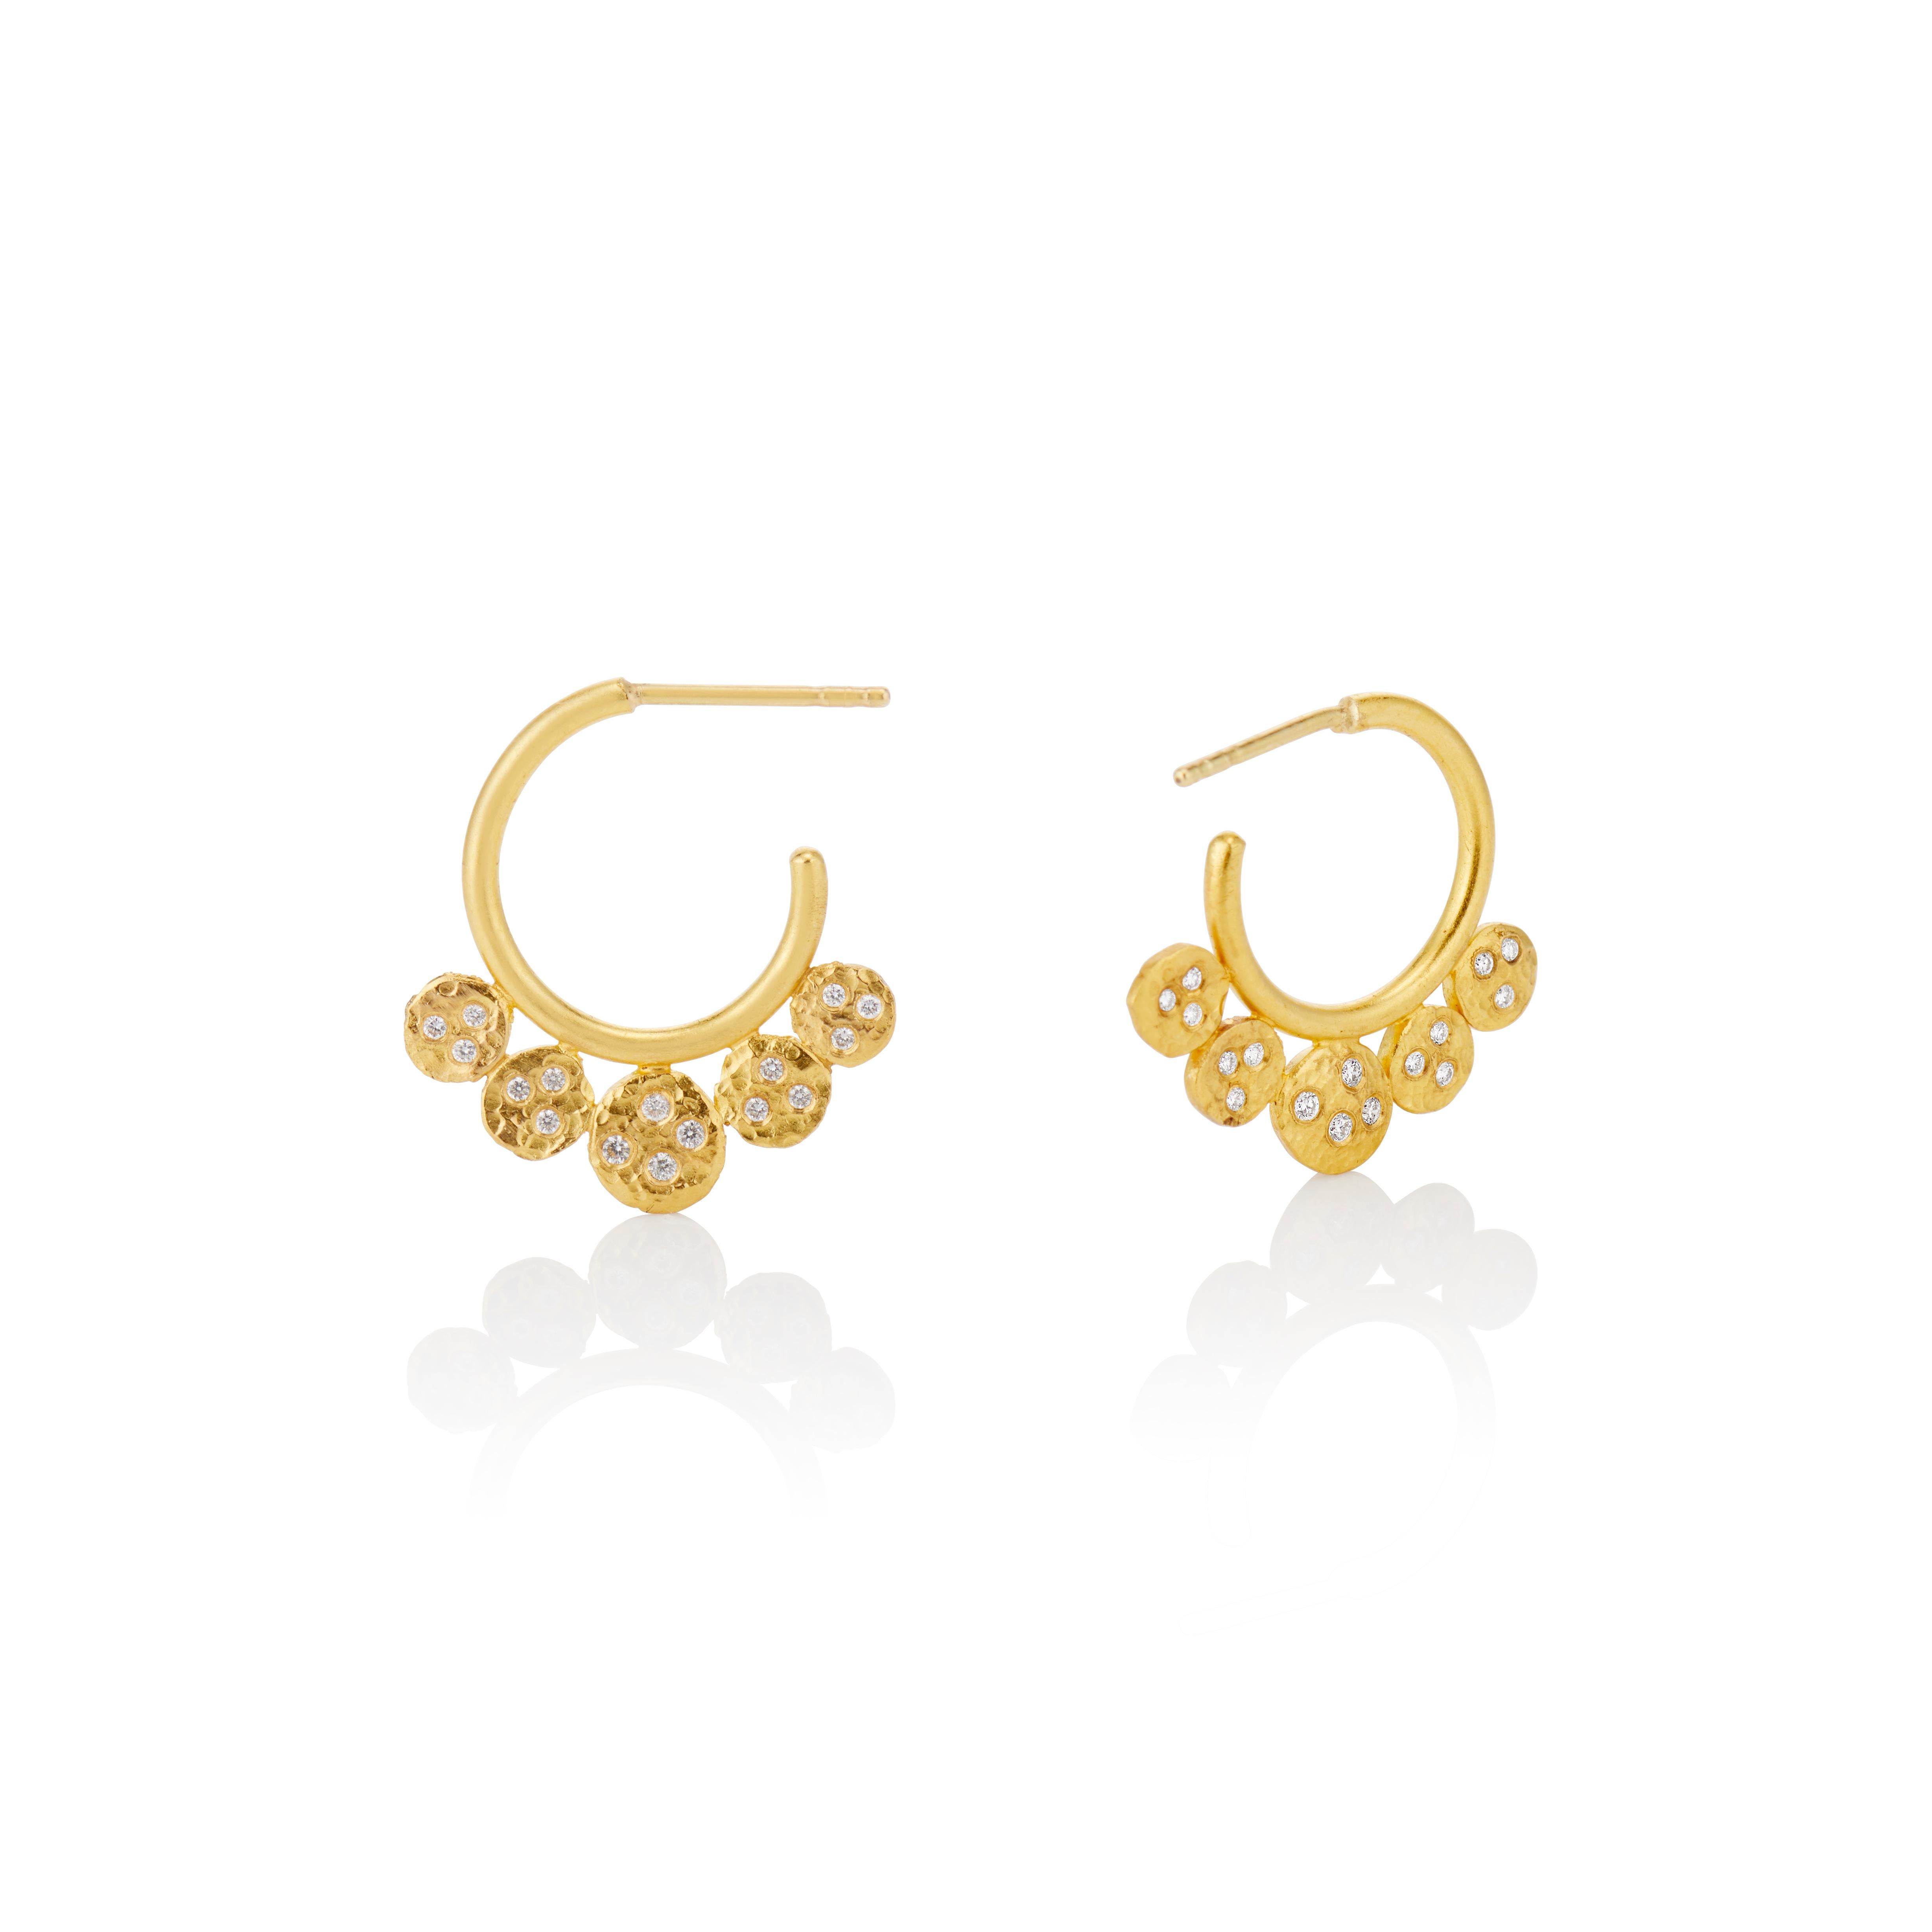 These charming and unique 22 karat yellow gold hoop earrings have five hammered gold coins sprinkled with round white diamonds .64 (total carat weight.  The hoops which measure .75 inches have 18 karat yellow posts and backs which fit securely on